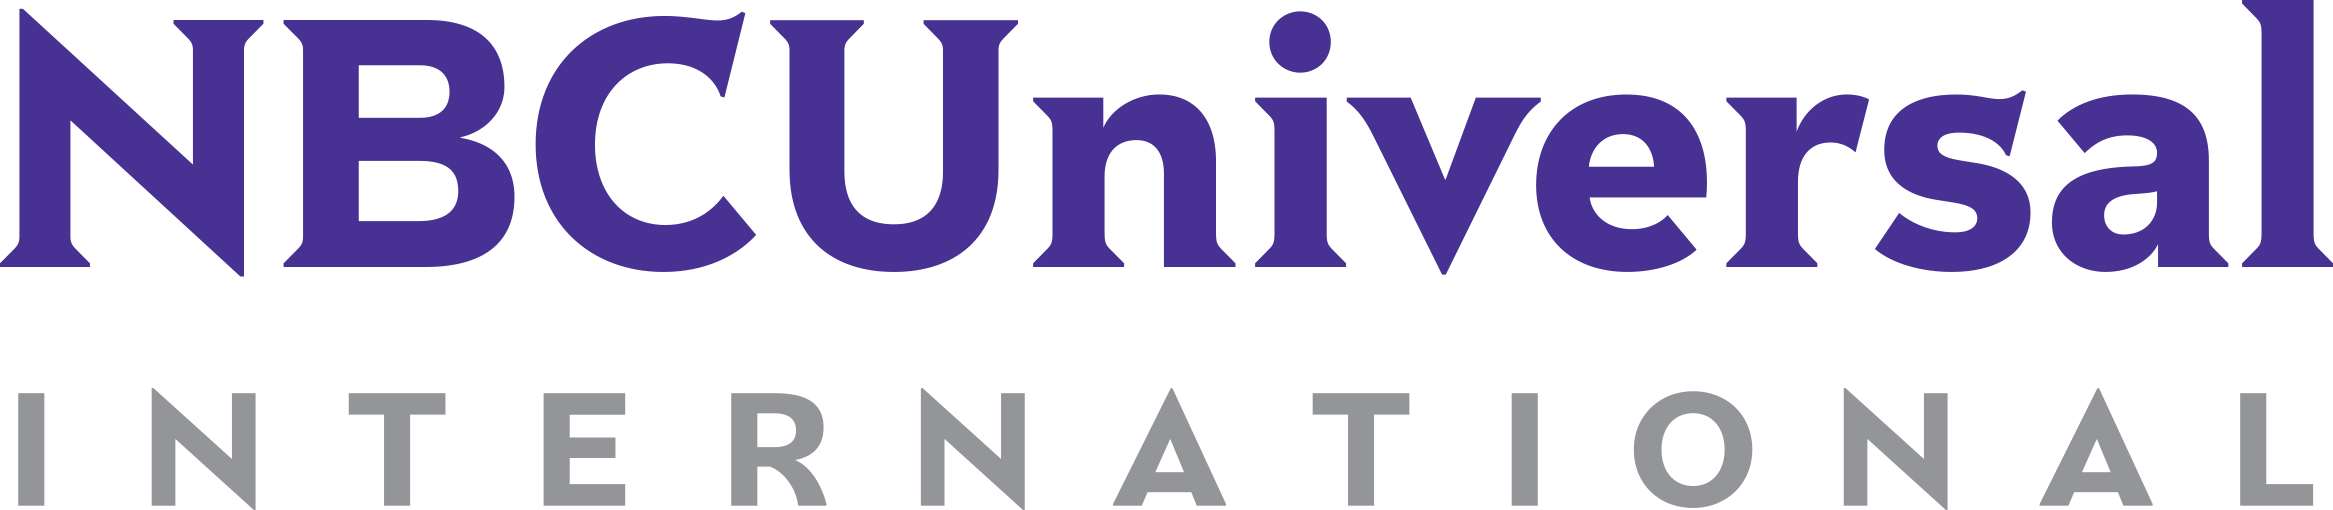 NBCU Logo - Home | NBCUniversal International Jobs and Careers